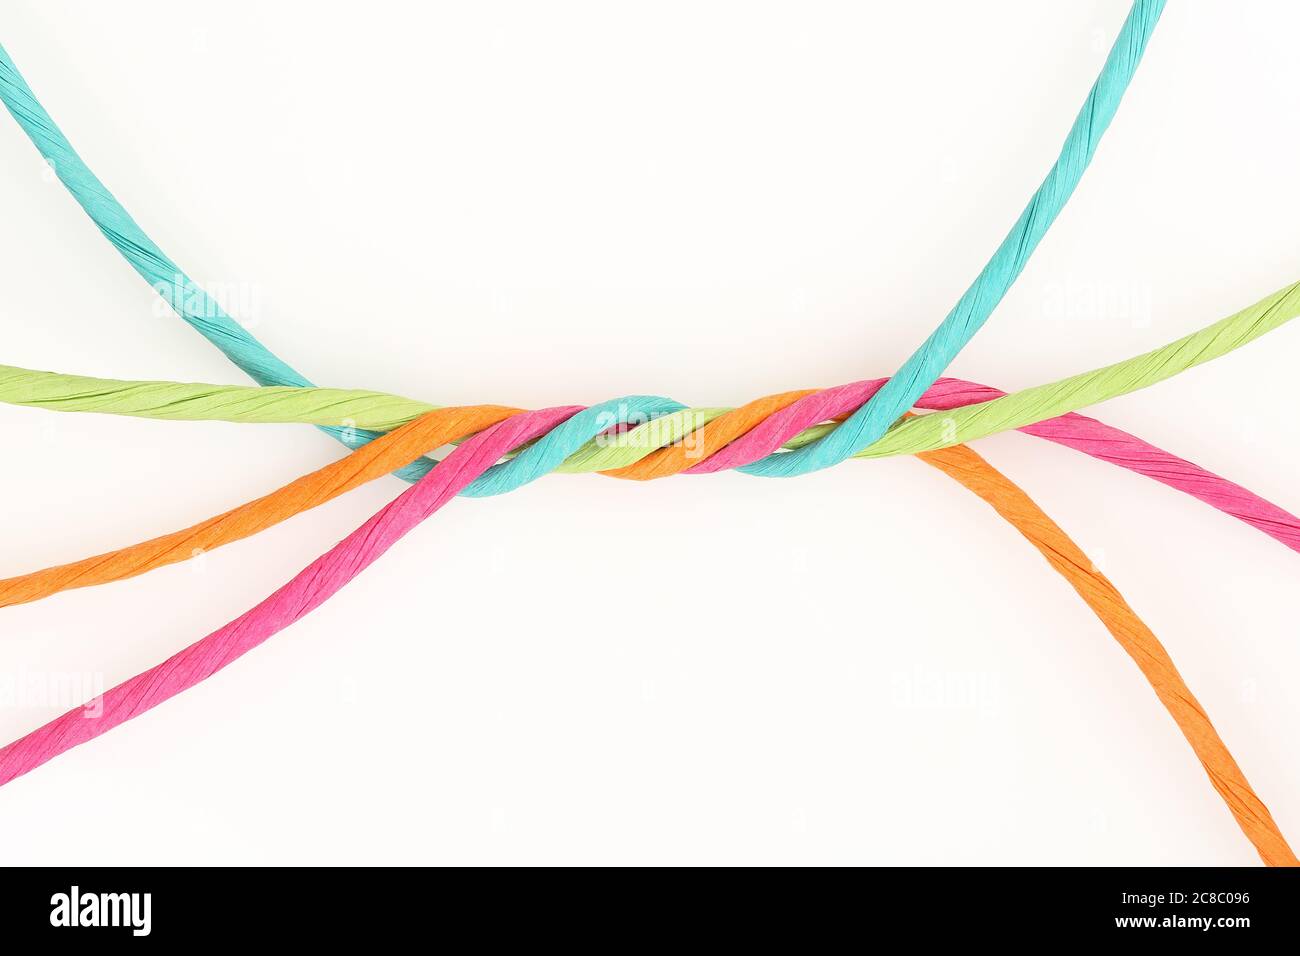 intertwined colorful cords on white, abstract unity concept Stock Photo